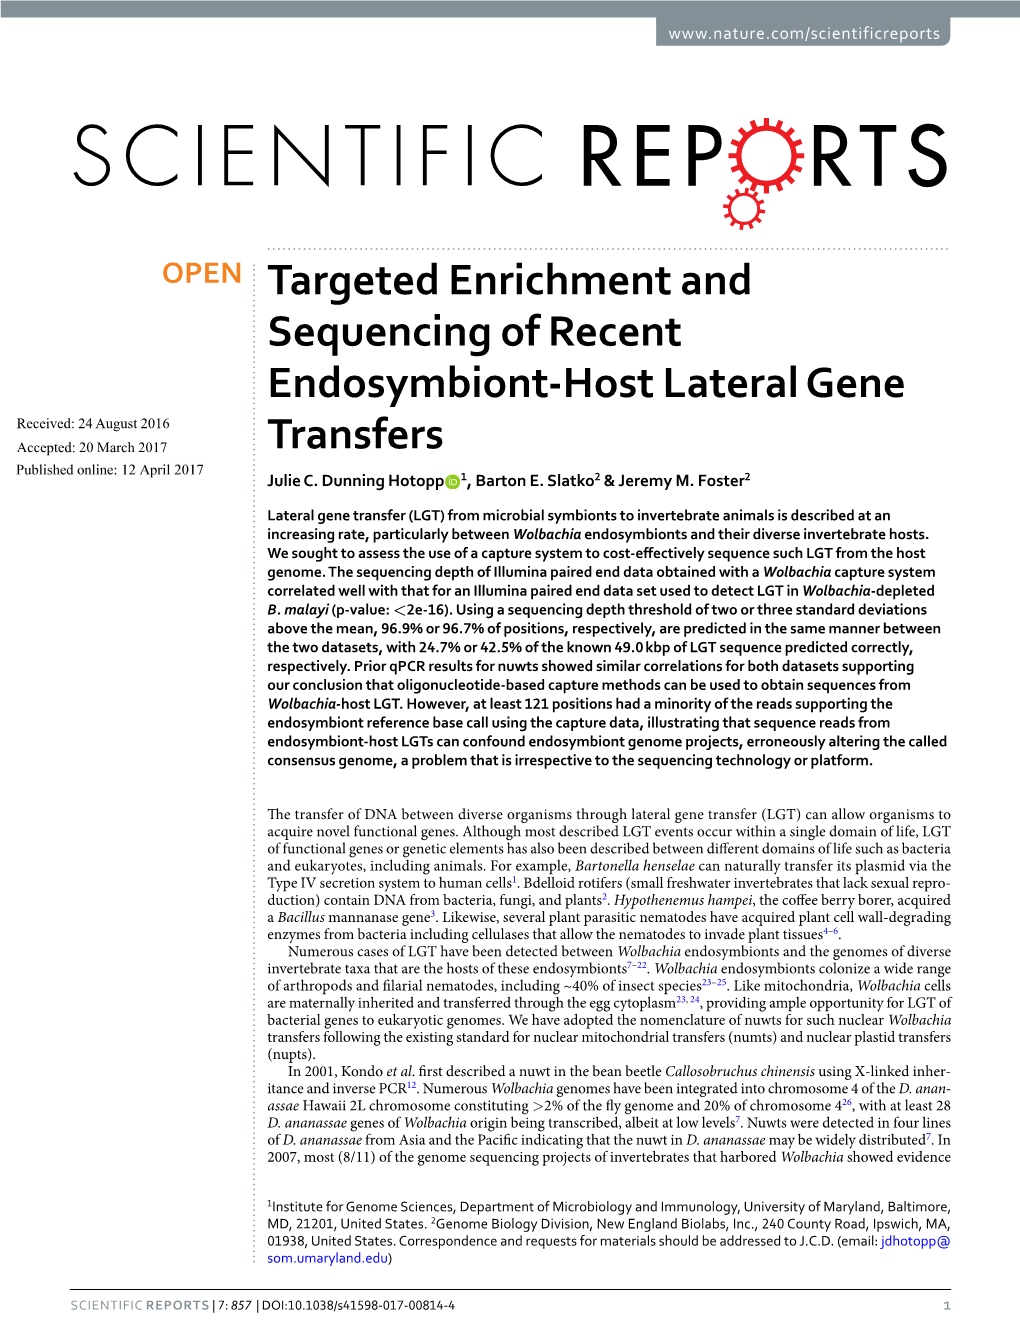 Targeted Enrichment and Sequencing of Recent Endosymbiont-Host Lateral Gene Received: 24 August 2016 Accepted: 20 March 2017 Transfers Published: Xx Xx Xxxx Julie C